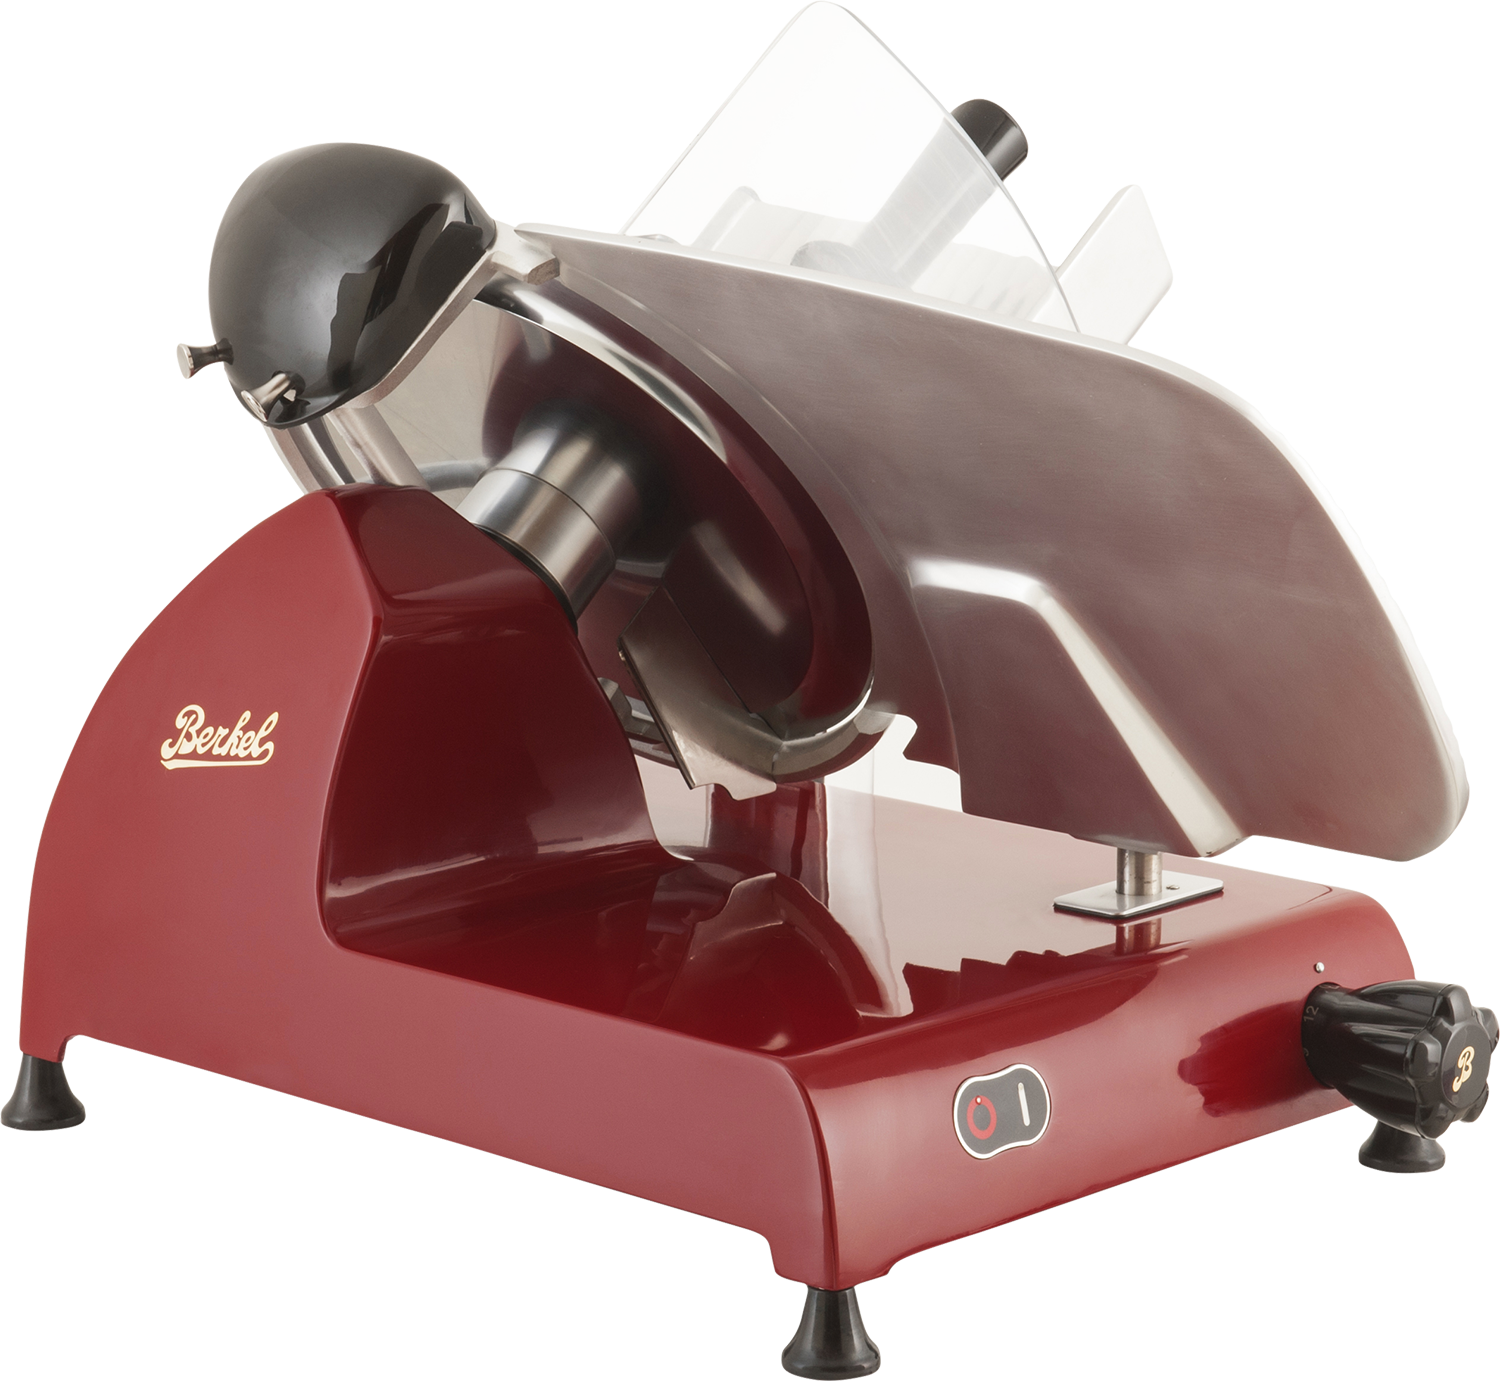 Berkel Red line 250 slicer + Red ash and stainless steel chopping board